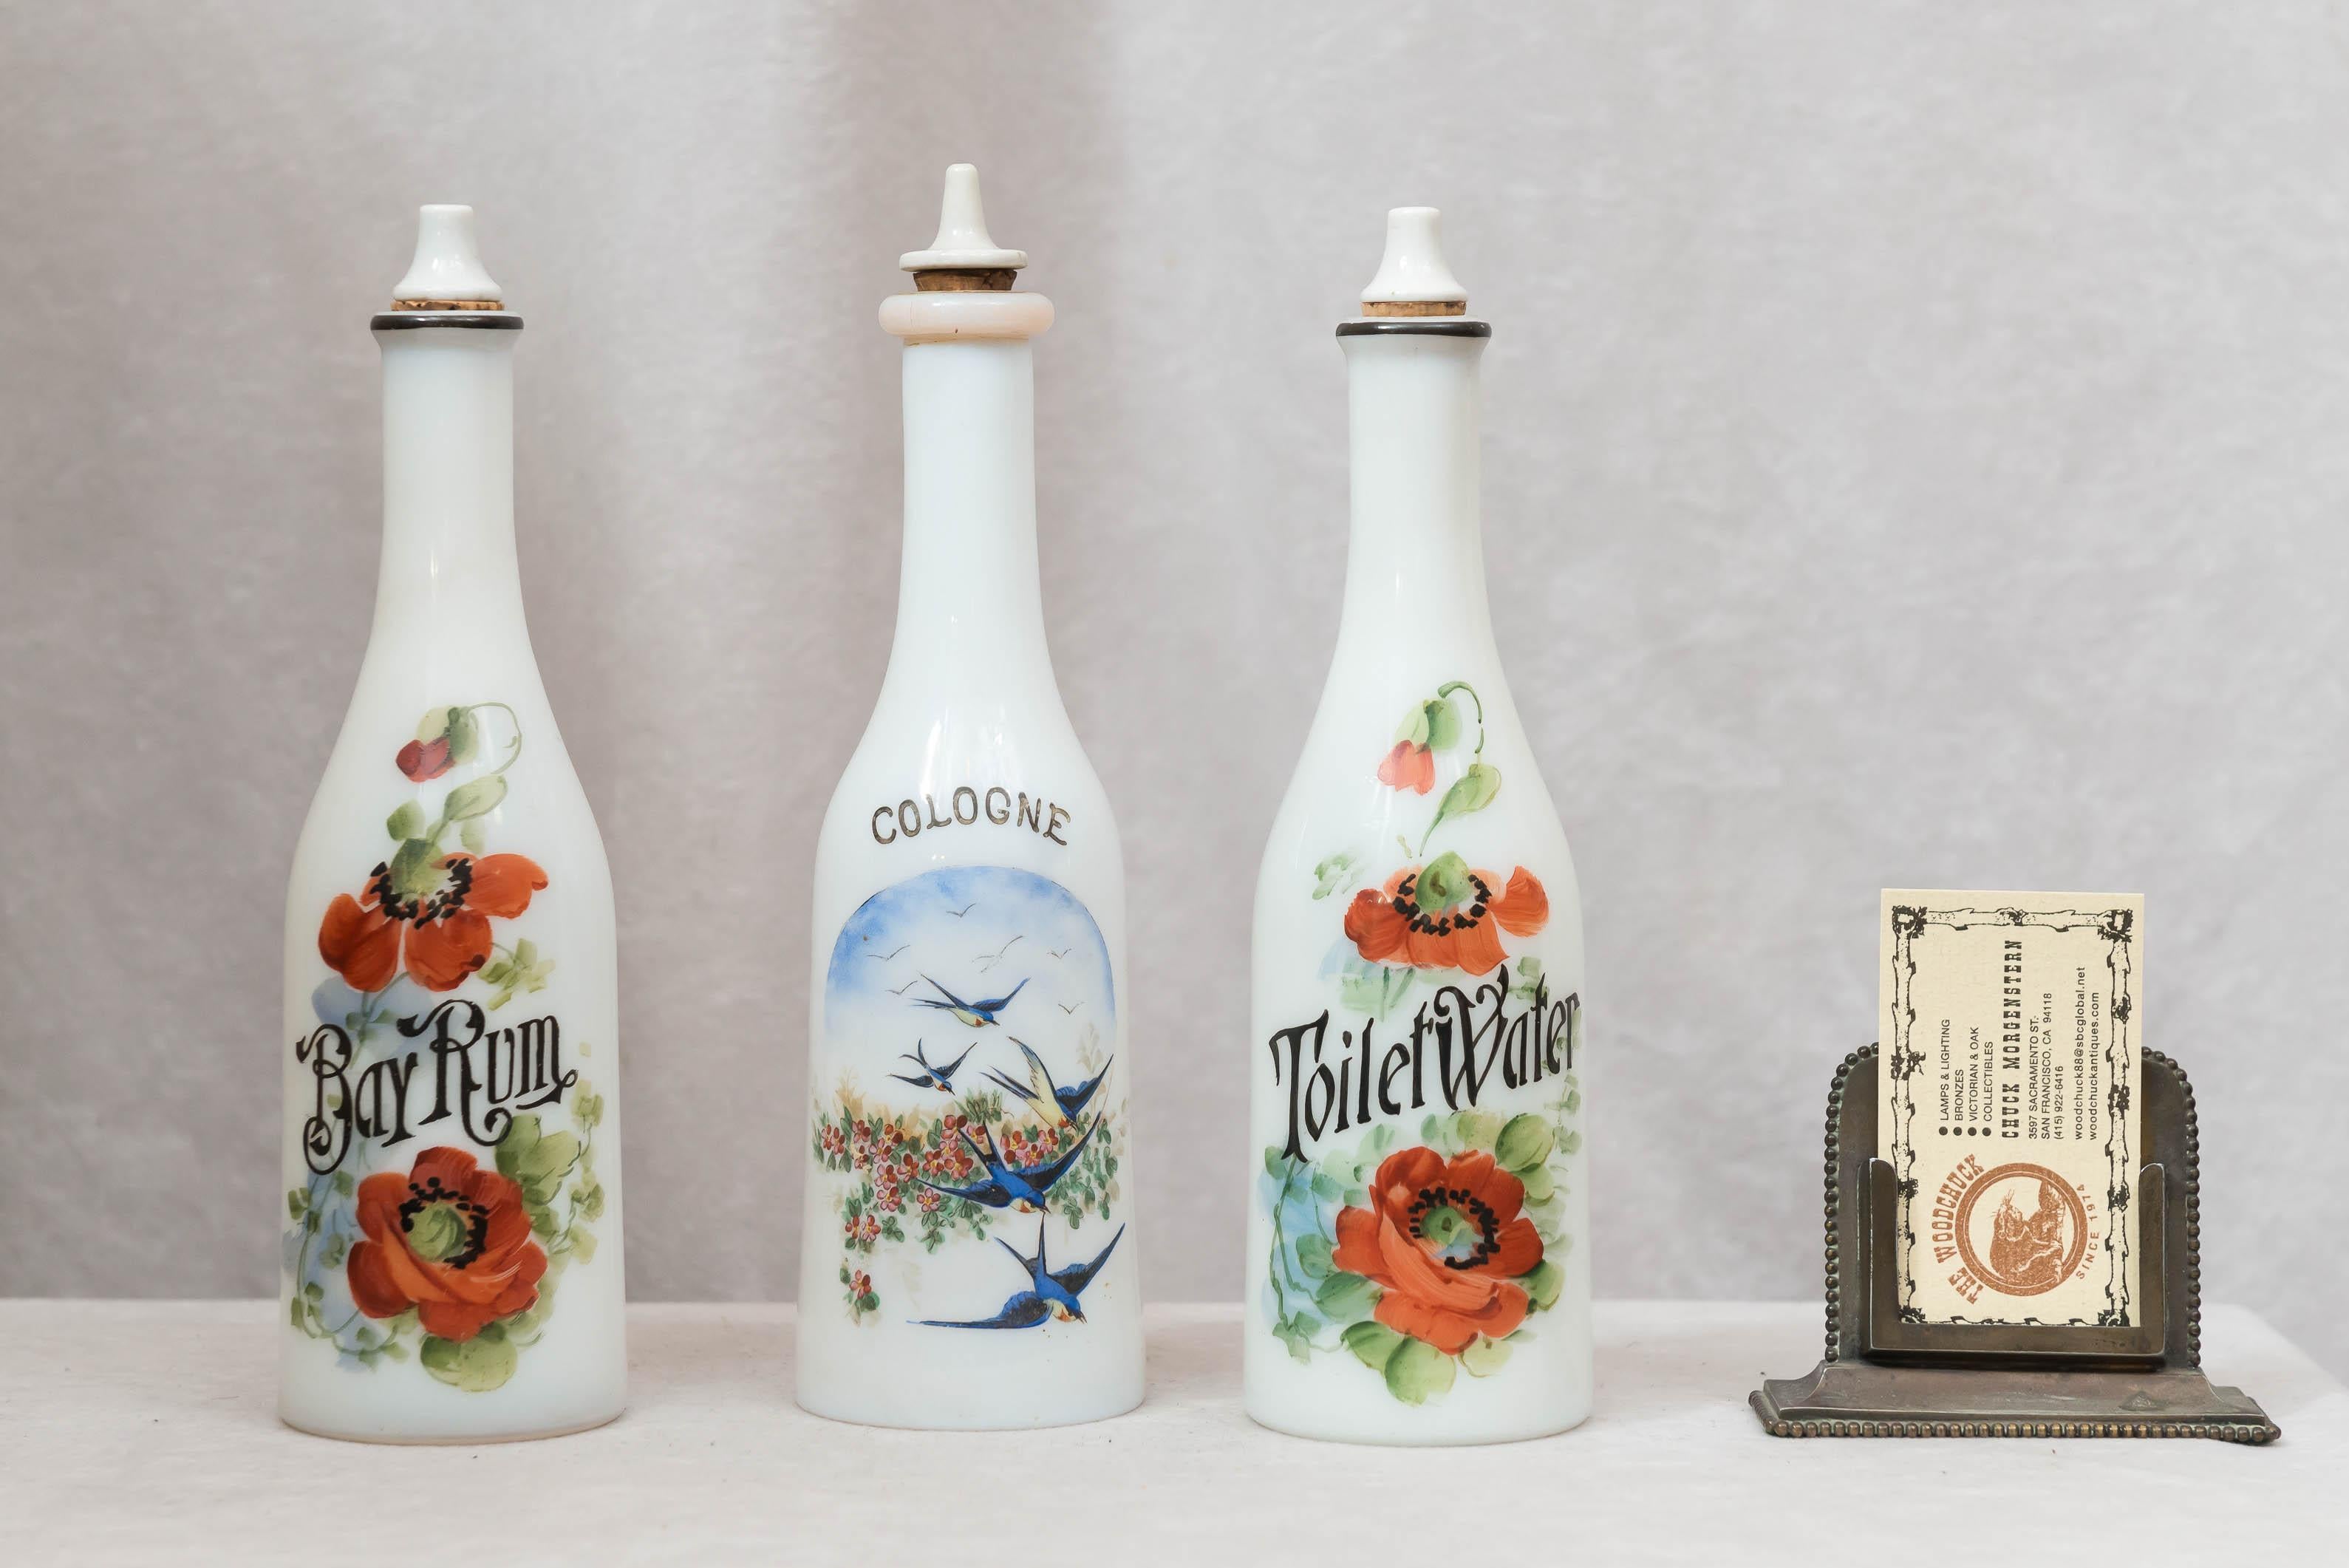 We rarely get these antique barber shop bottles, and when we do, they are never this beautiful, and they seem to always be missing the tops. It's hard to find fault with these beauties. One can imagine what life was like when your barber used these